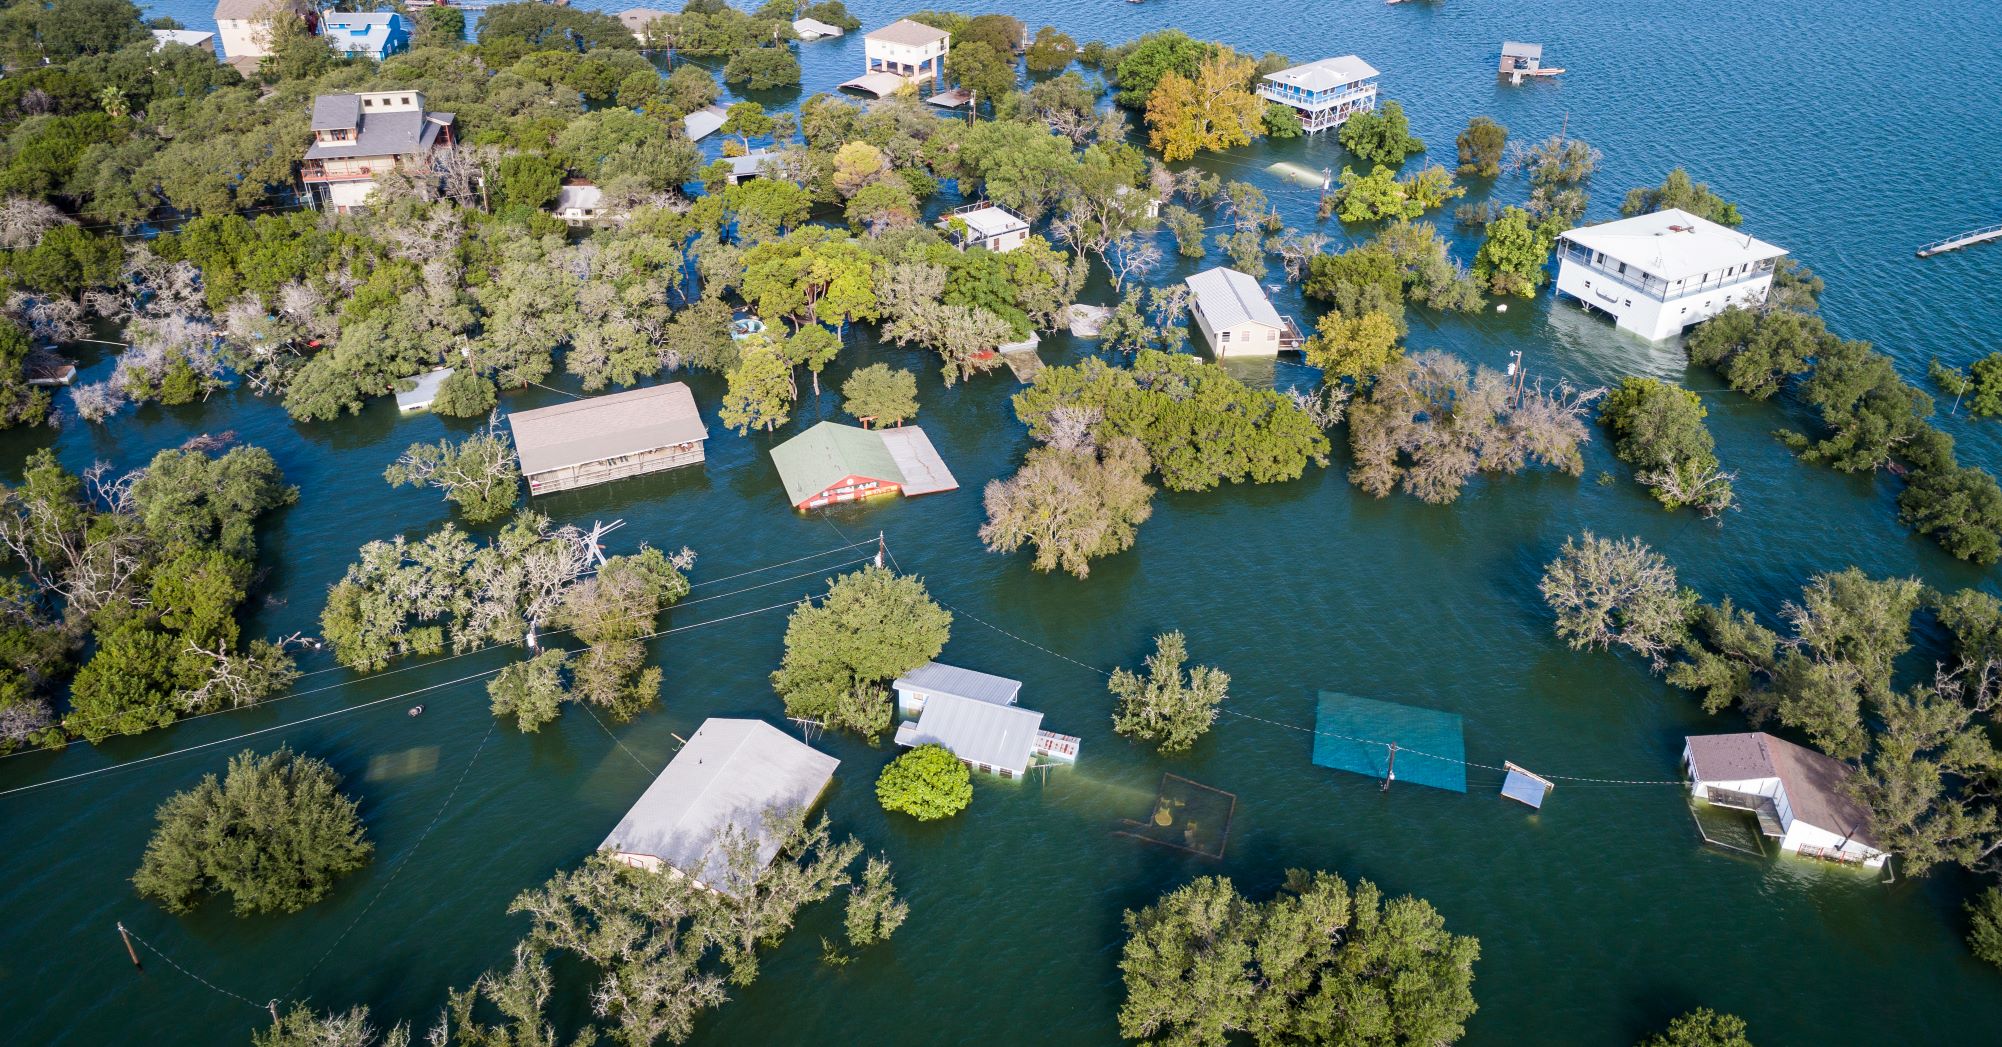  Multiple houses half under water as shown by aerial drone views high above flooding. Credit: Shutterstock/Roschetzky Photography